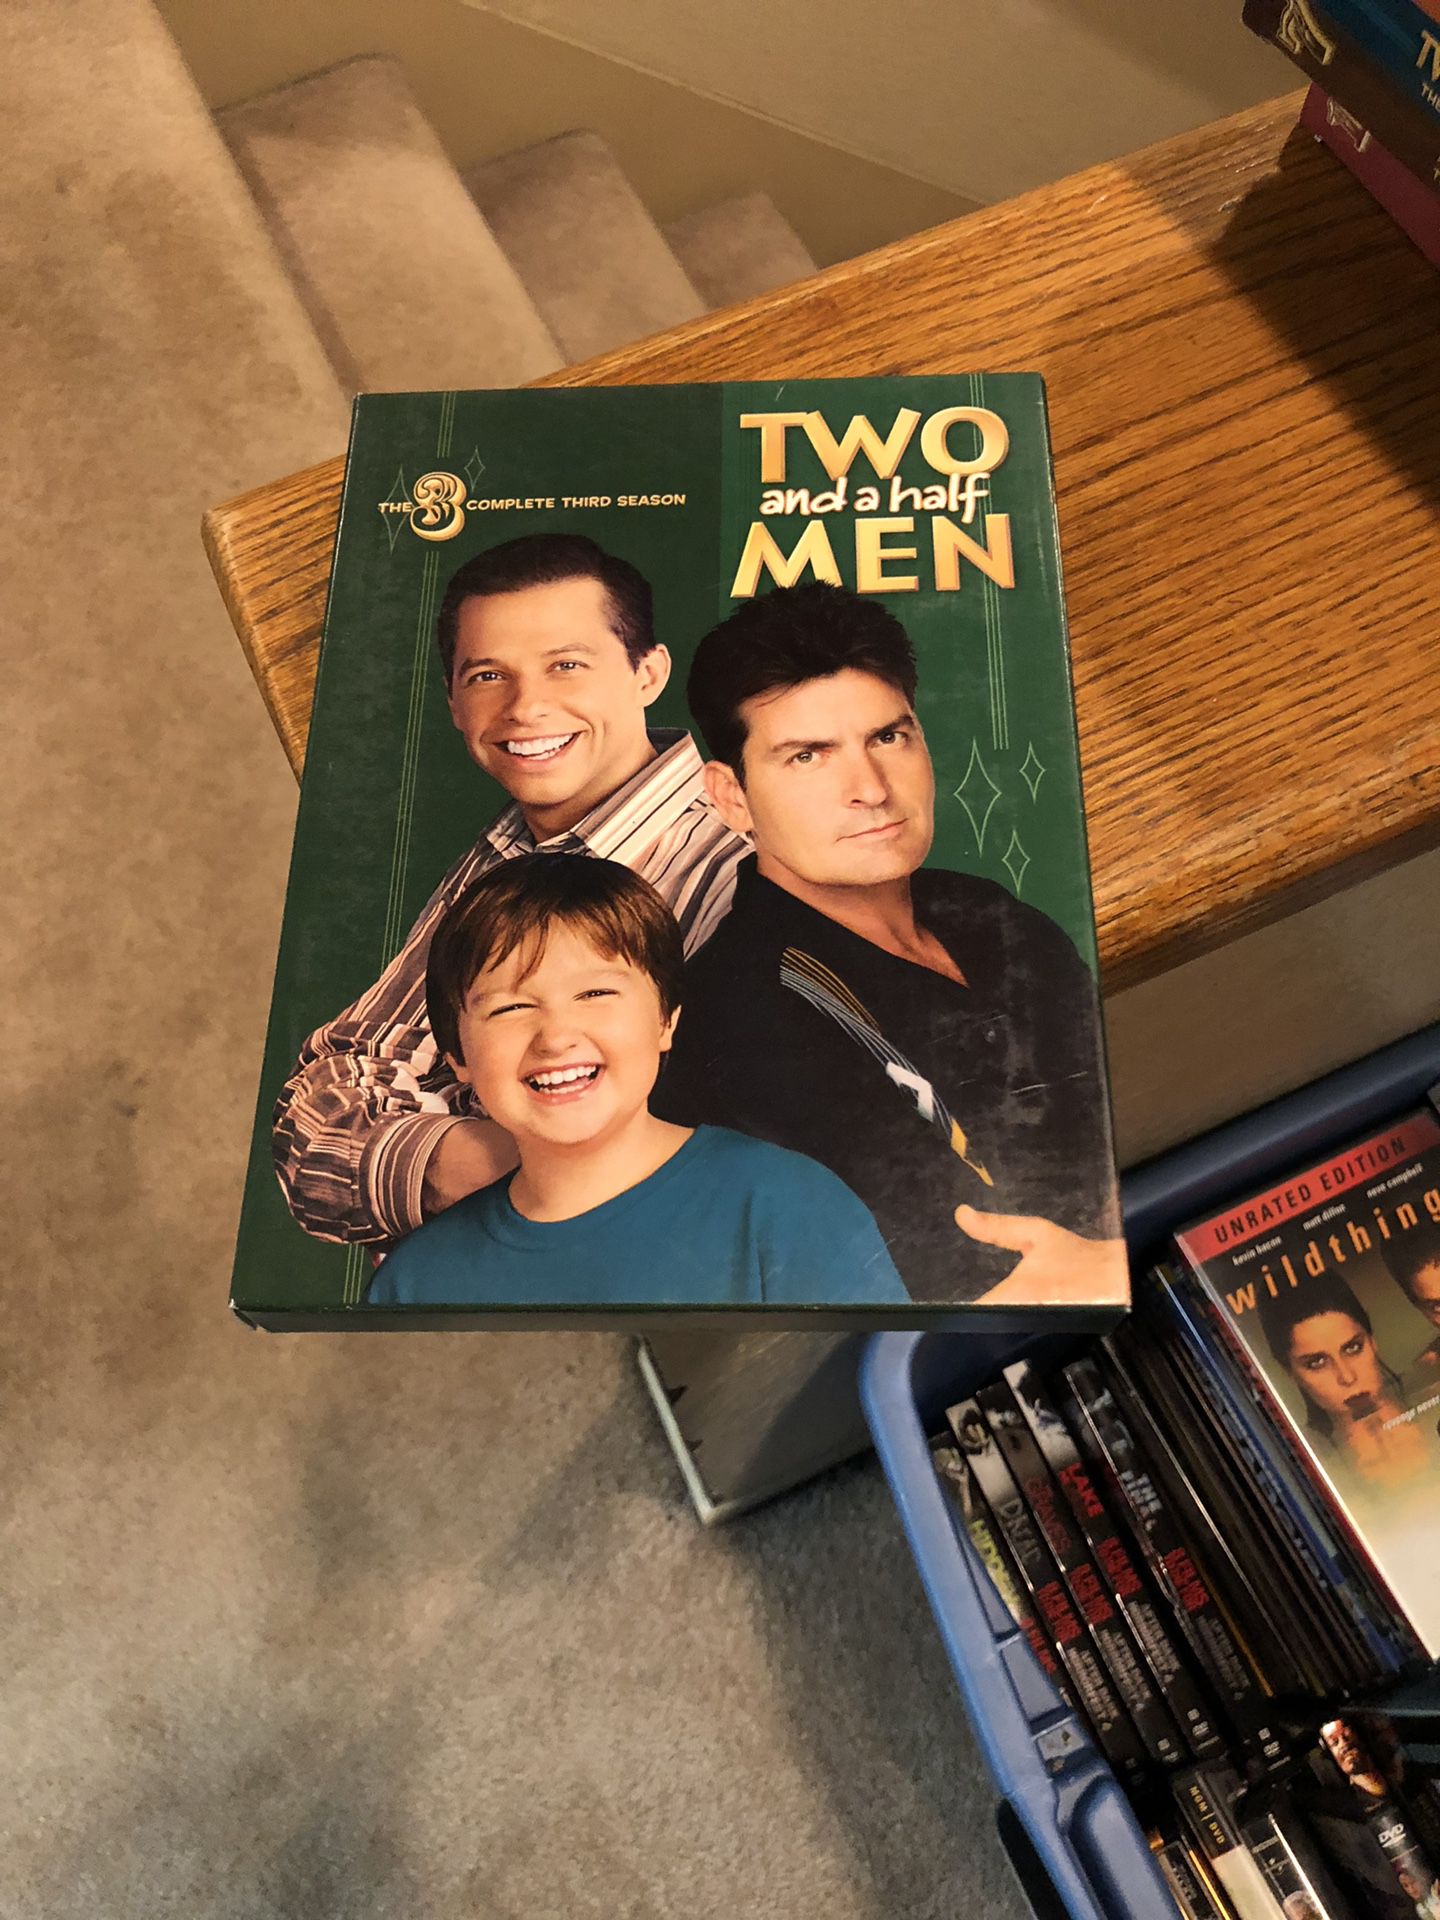 Two And A Half Men The Complete Third Season DVD 3 three box set S3 Charlie Sheen